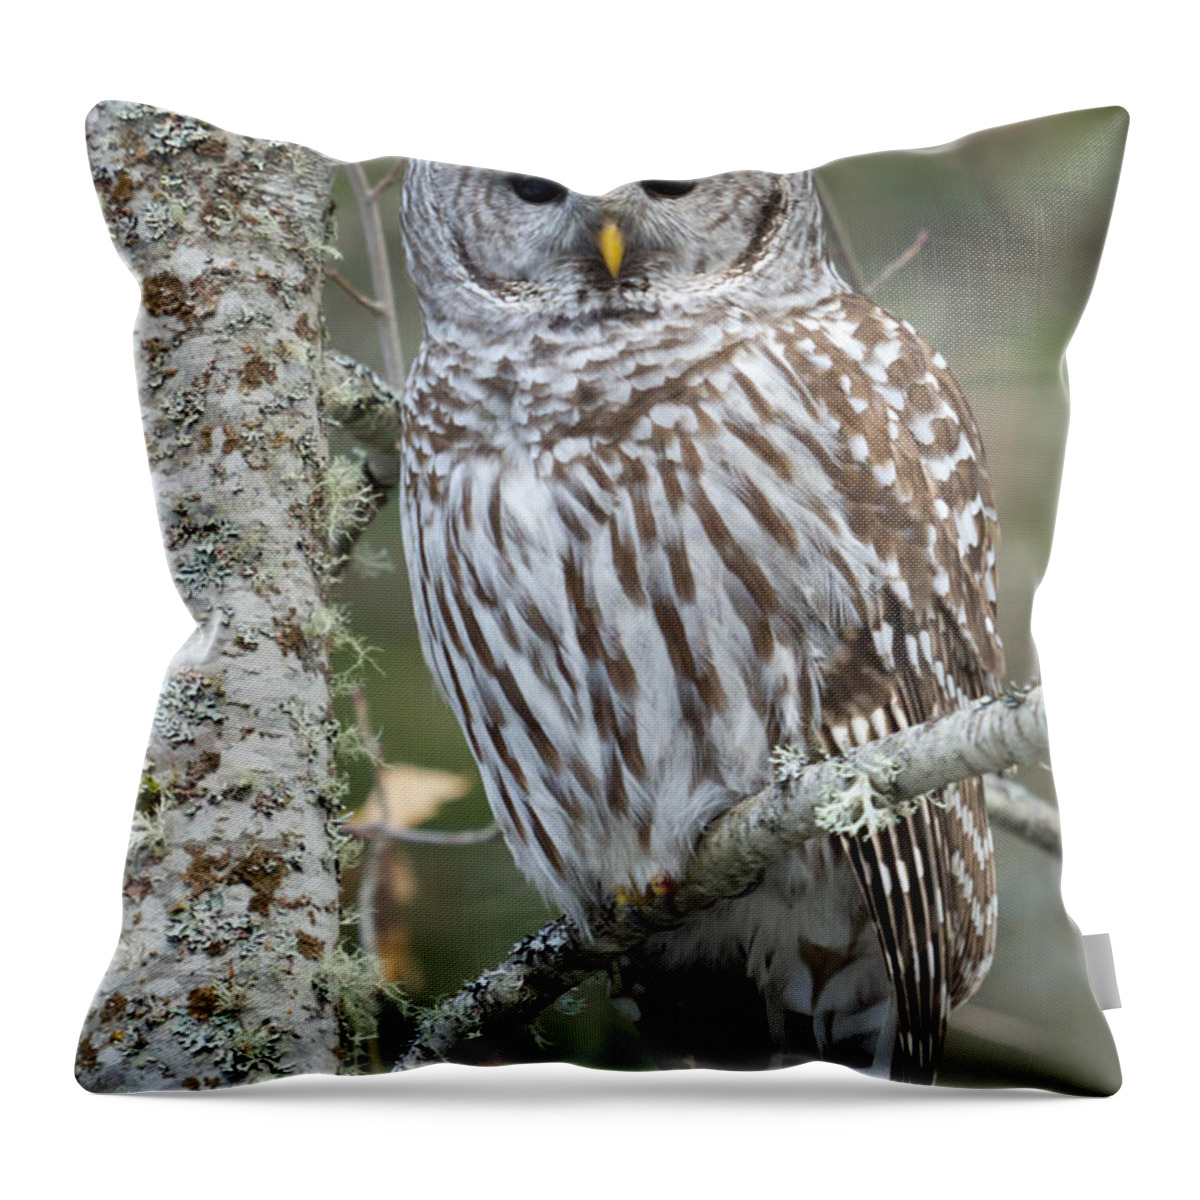 Barred Owl Throw Pillow featuring the photograph Hoot Hoot Hoot are You by Beve Brown-Clark Photography